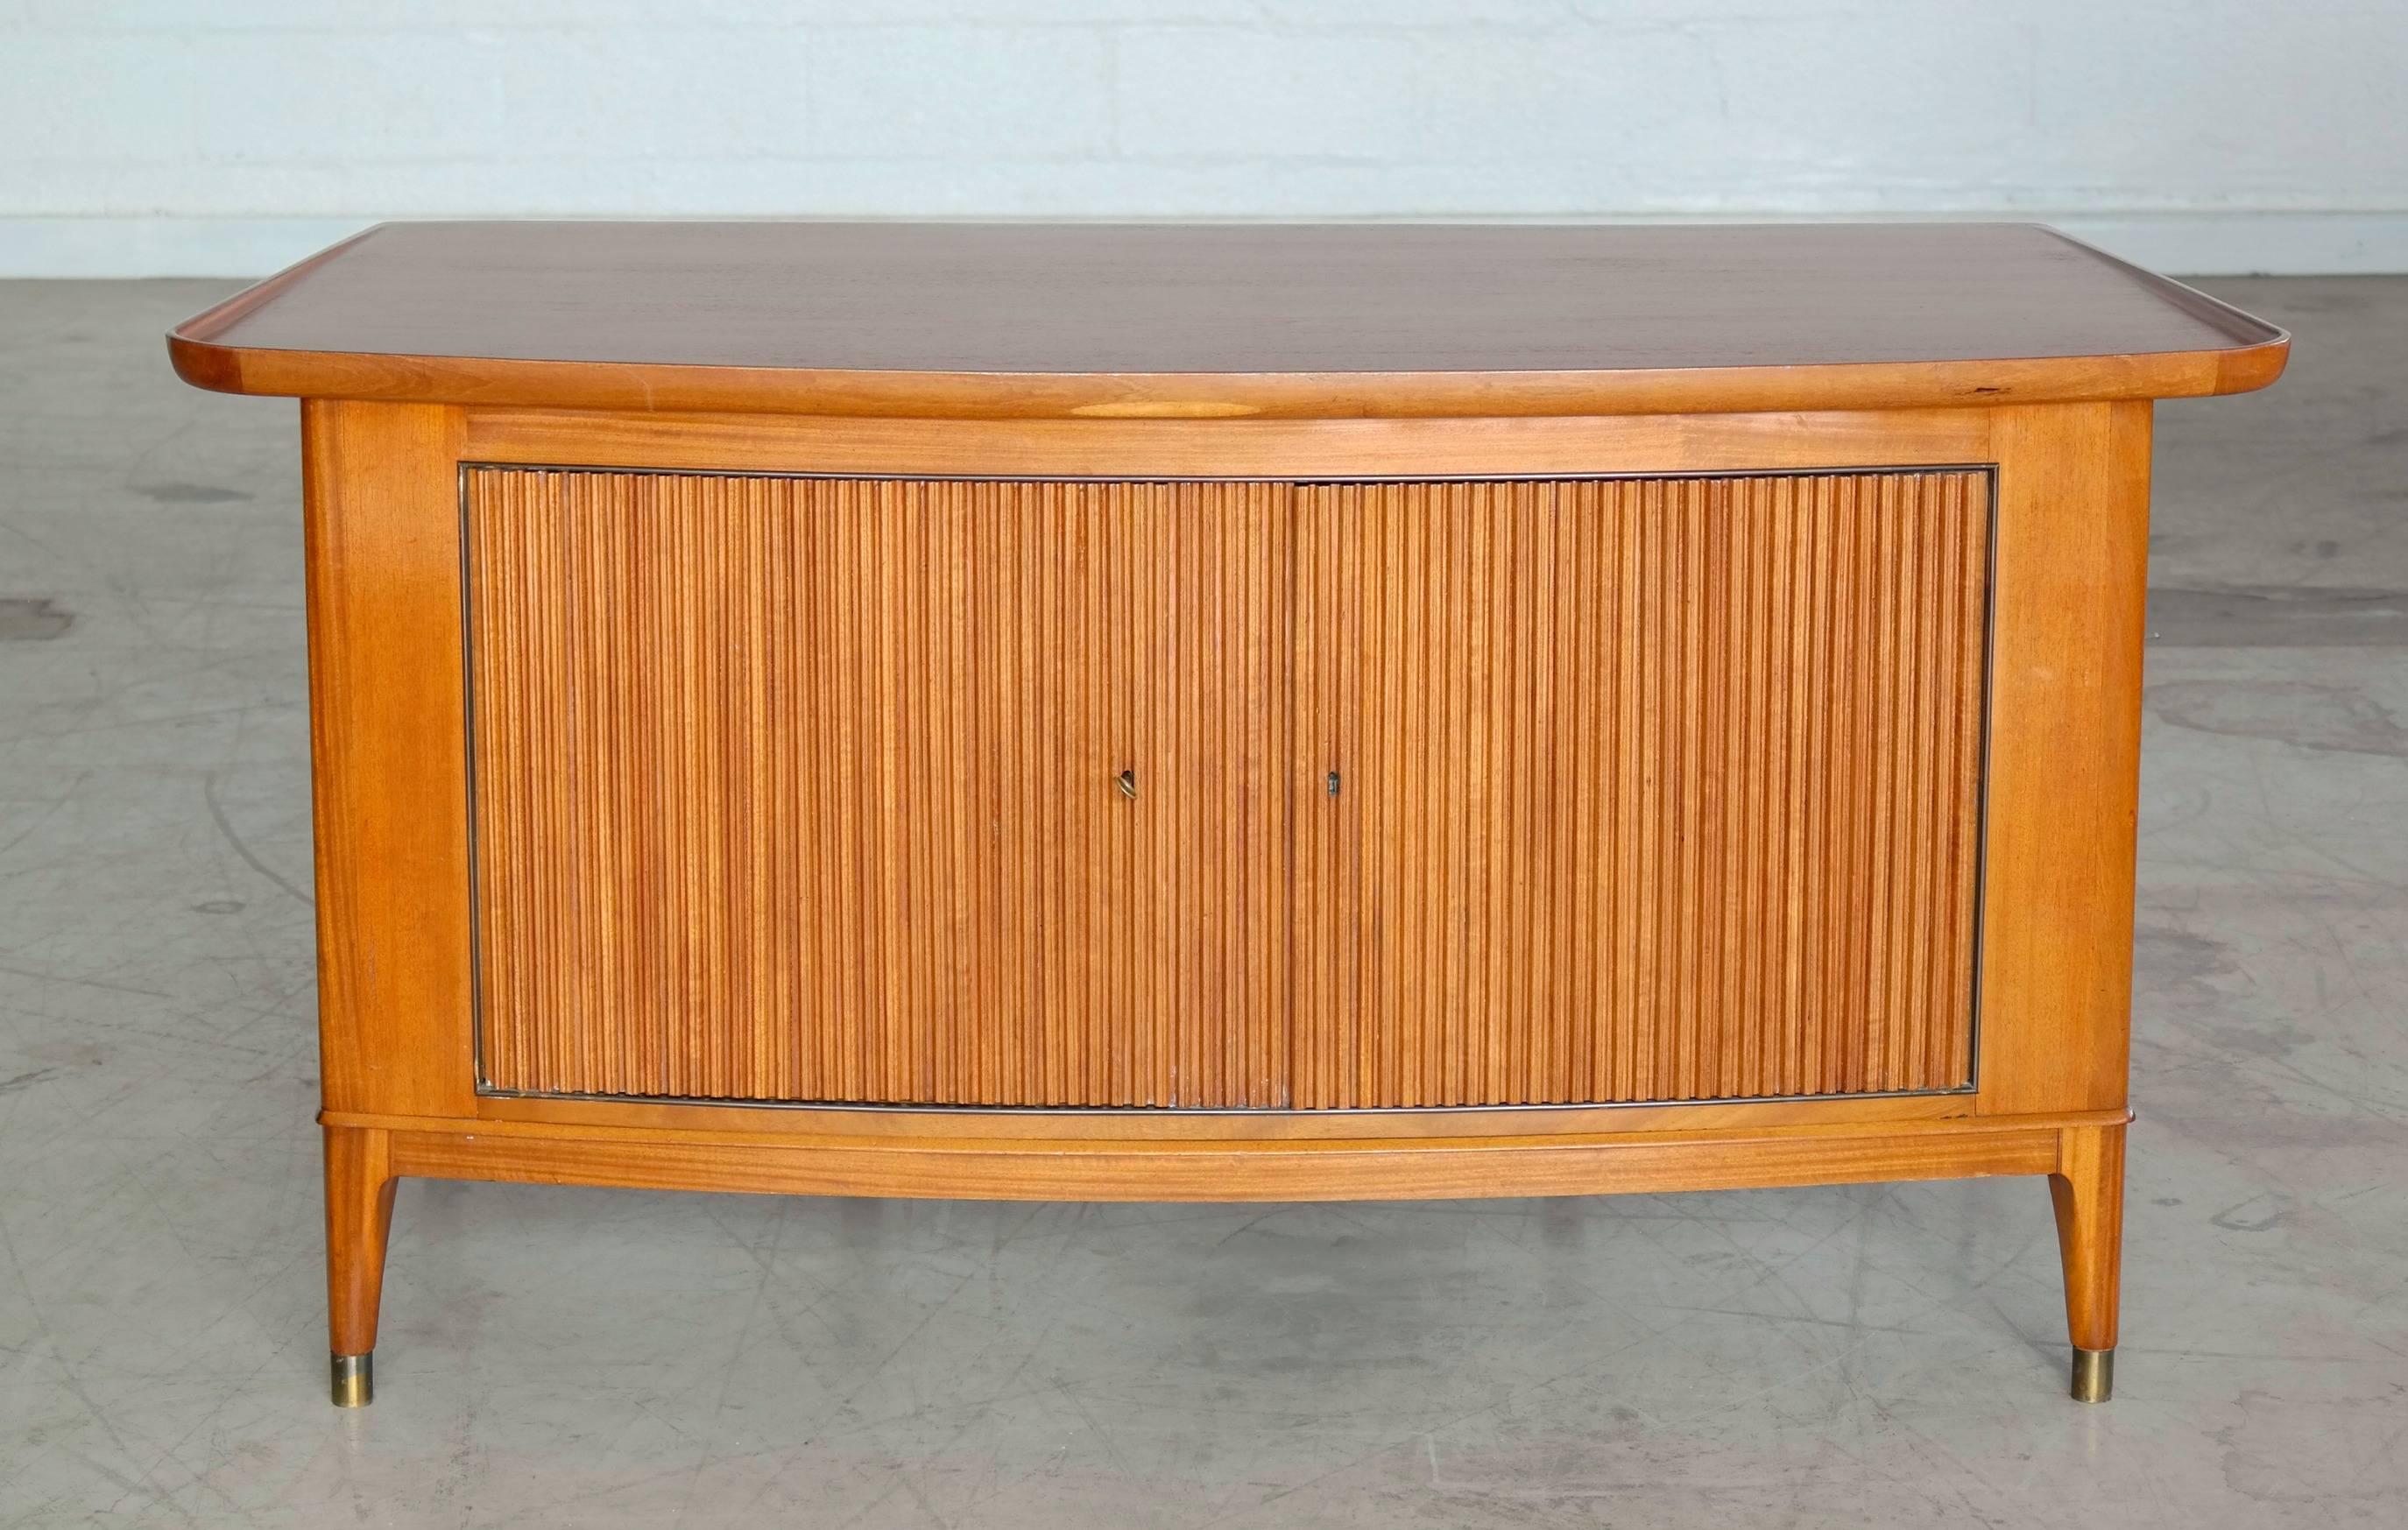 Superb quality 1930s Danish Art Deco period desk in pale Cuban mahogany with brass shoes. Beautifully made with rounded outer corners to give that true Art Deco flow to this quality desk. The front has two large lockable storage compartments behind